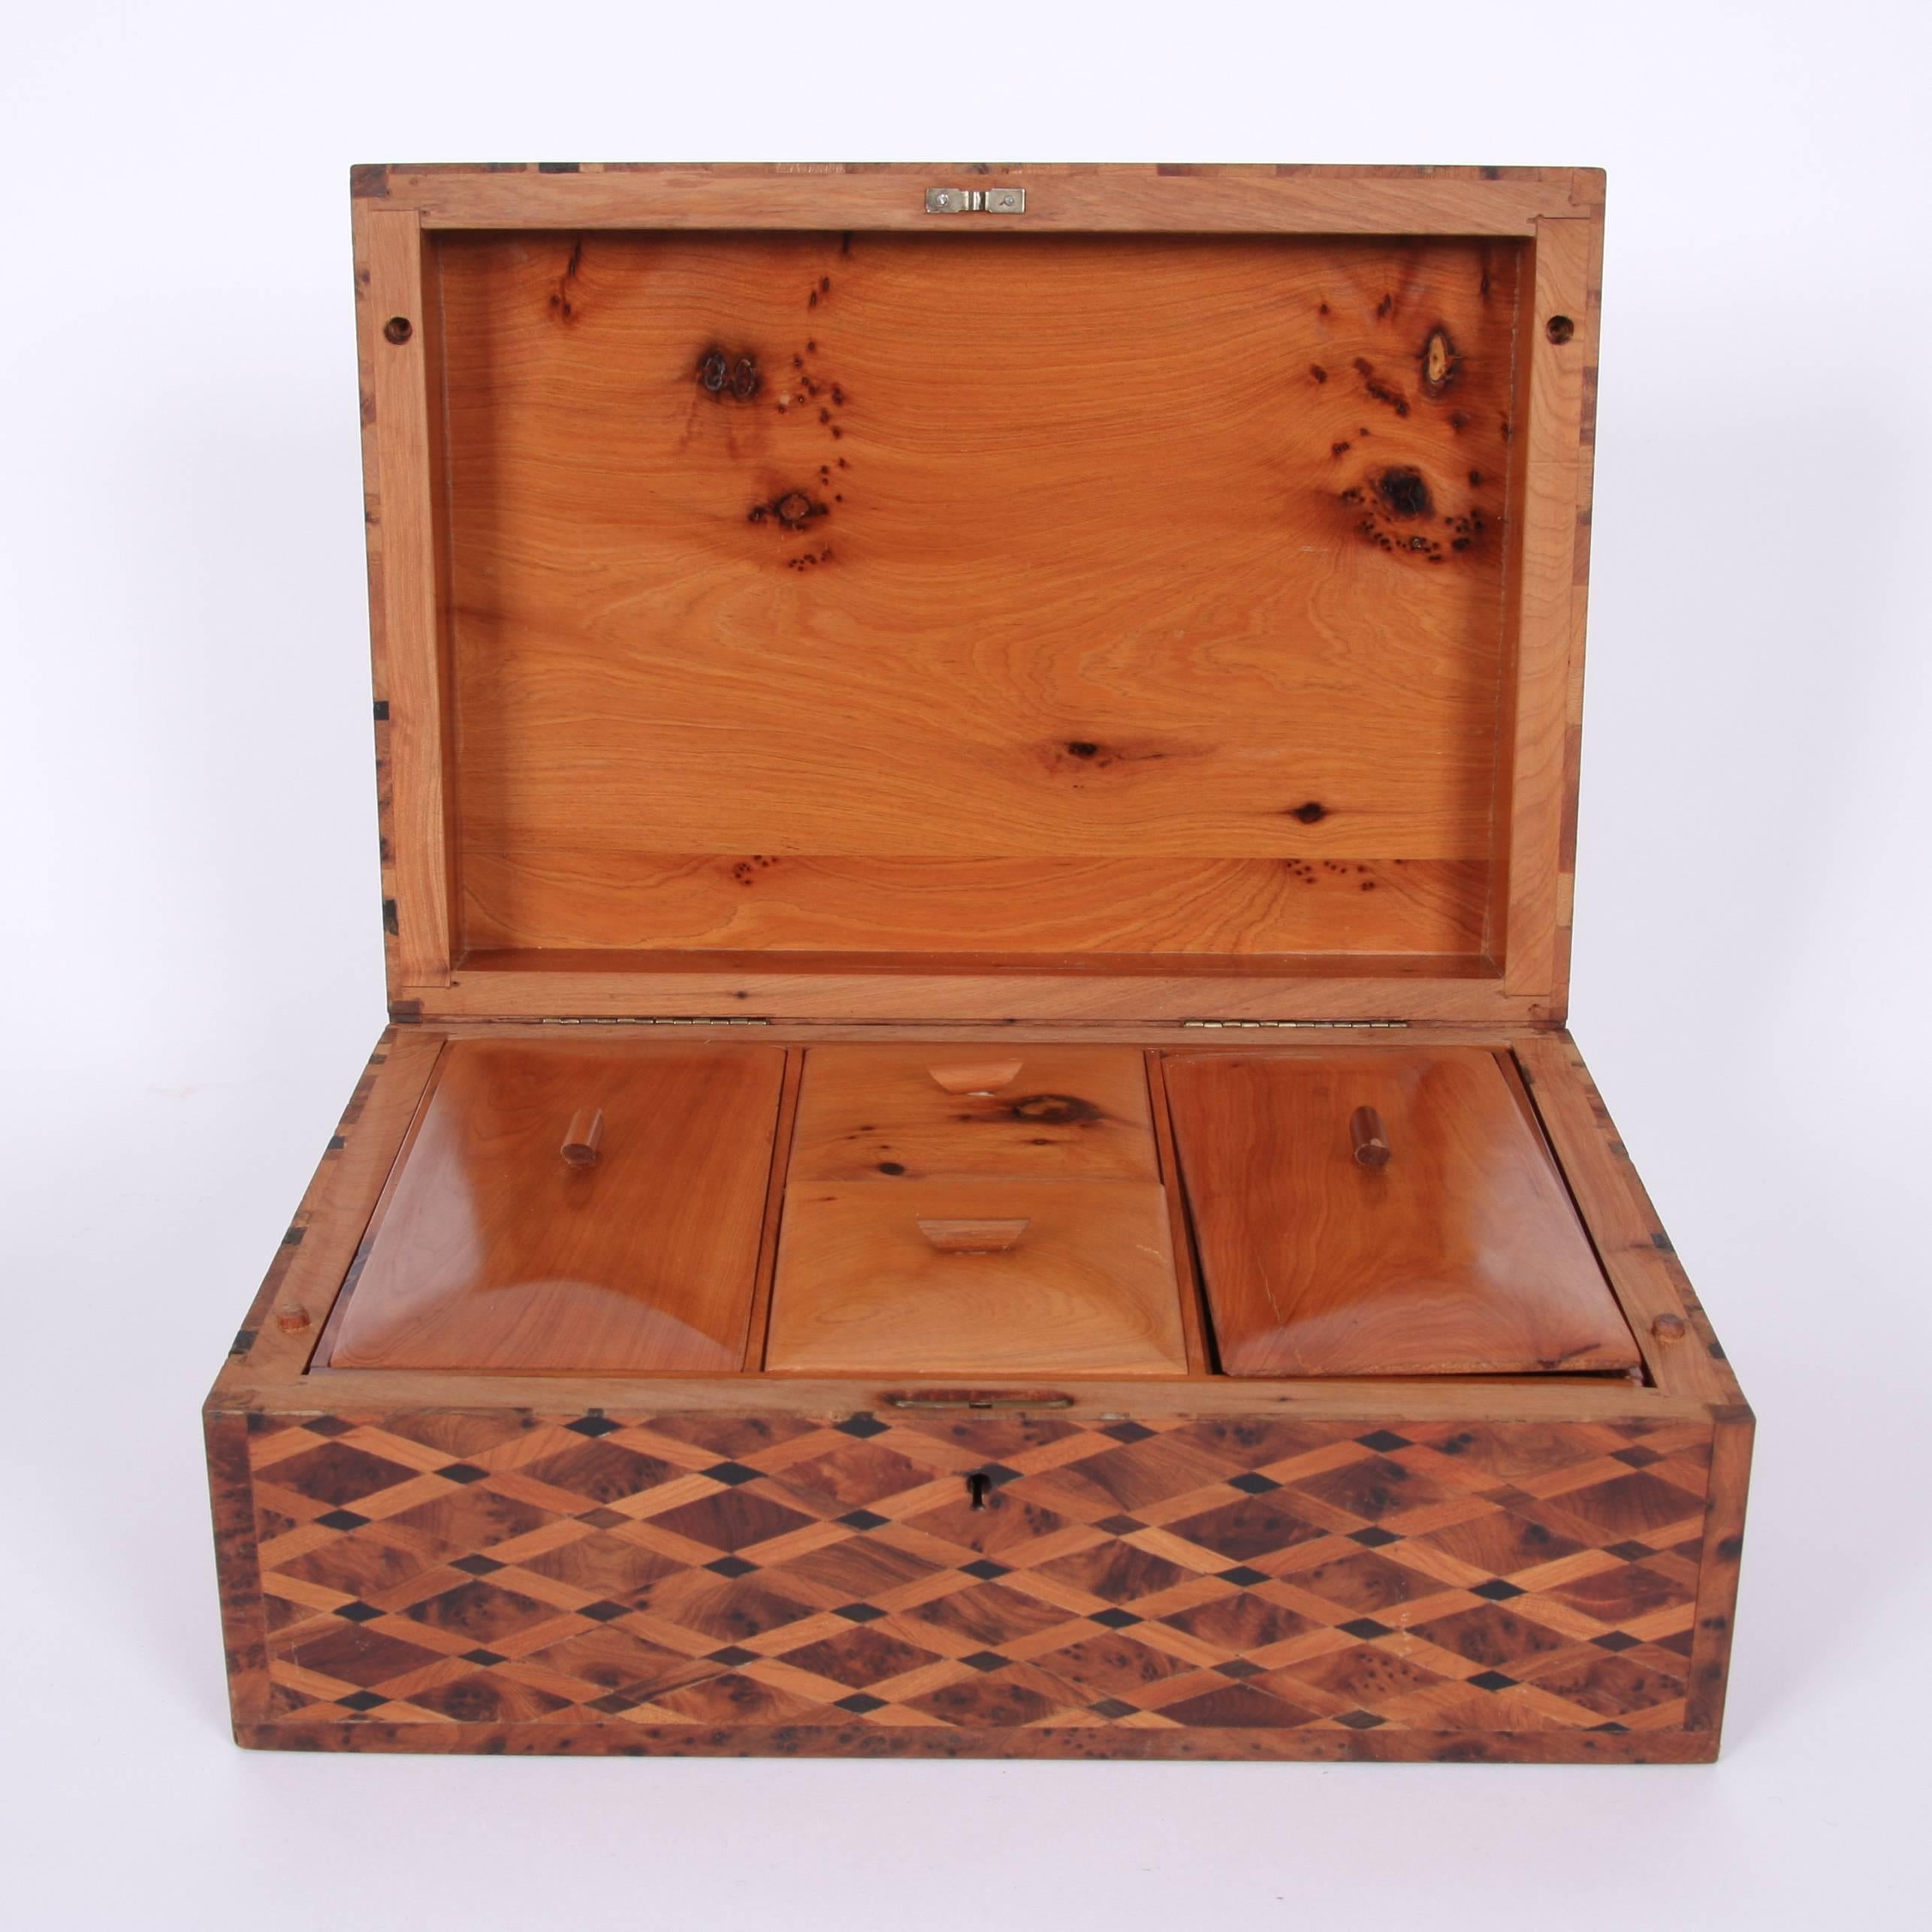 French, mid-20th century.

A beautiful parquetry design wooden box, suitable for use as either a sewing or trinket box or even as a jewelry box. Lid lifts up to reveal a tray that lifts out and smaller lidded compartments.